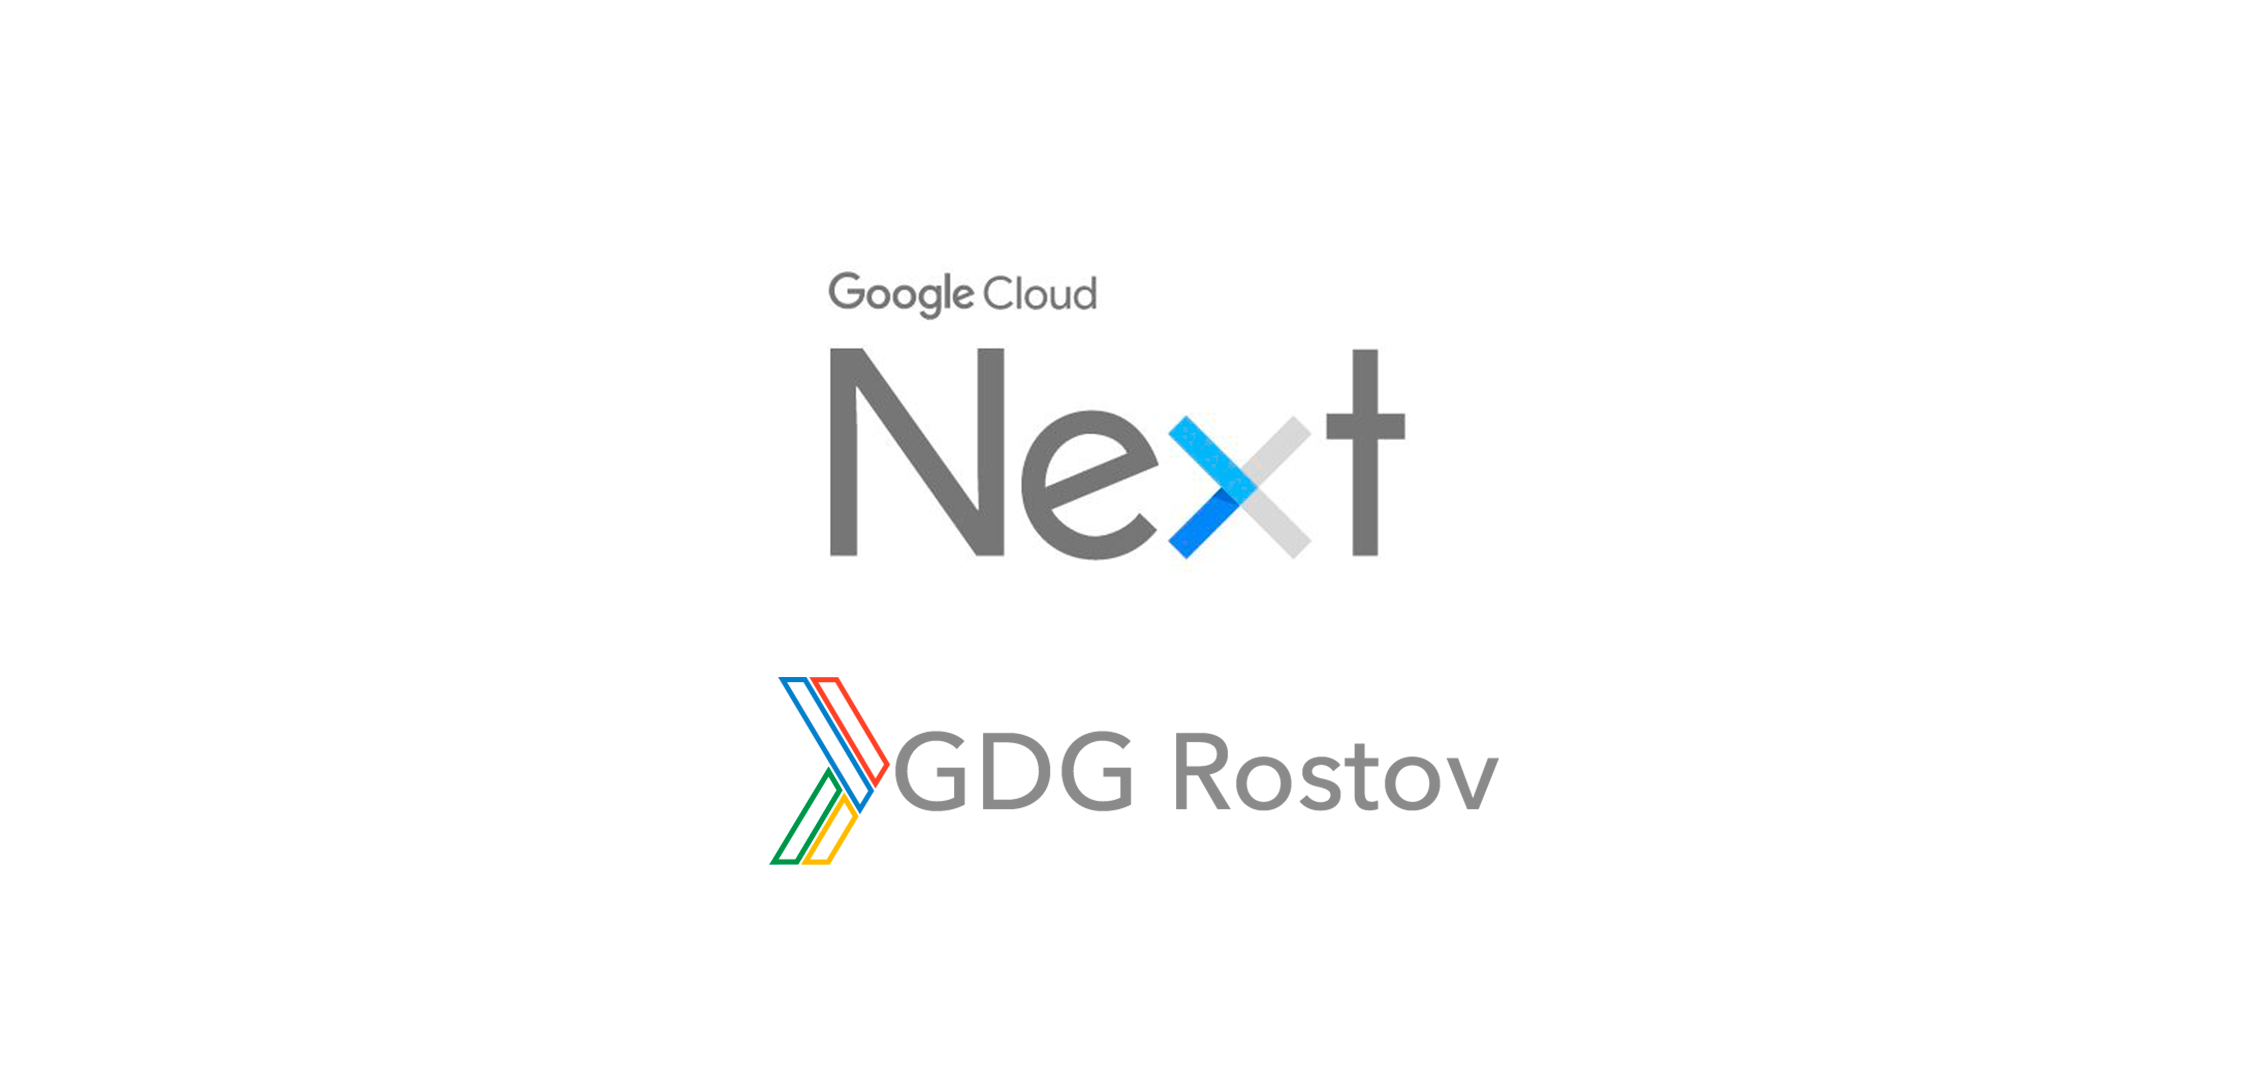 GDG Rostov Cloud Next Extended